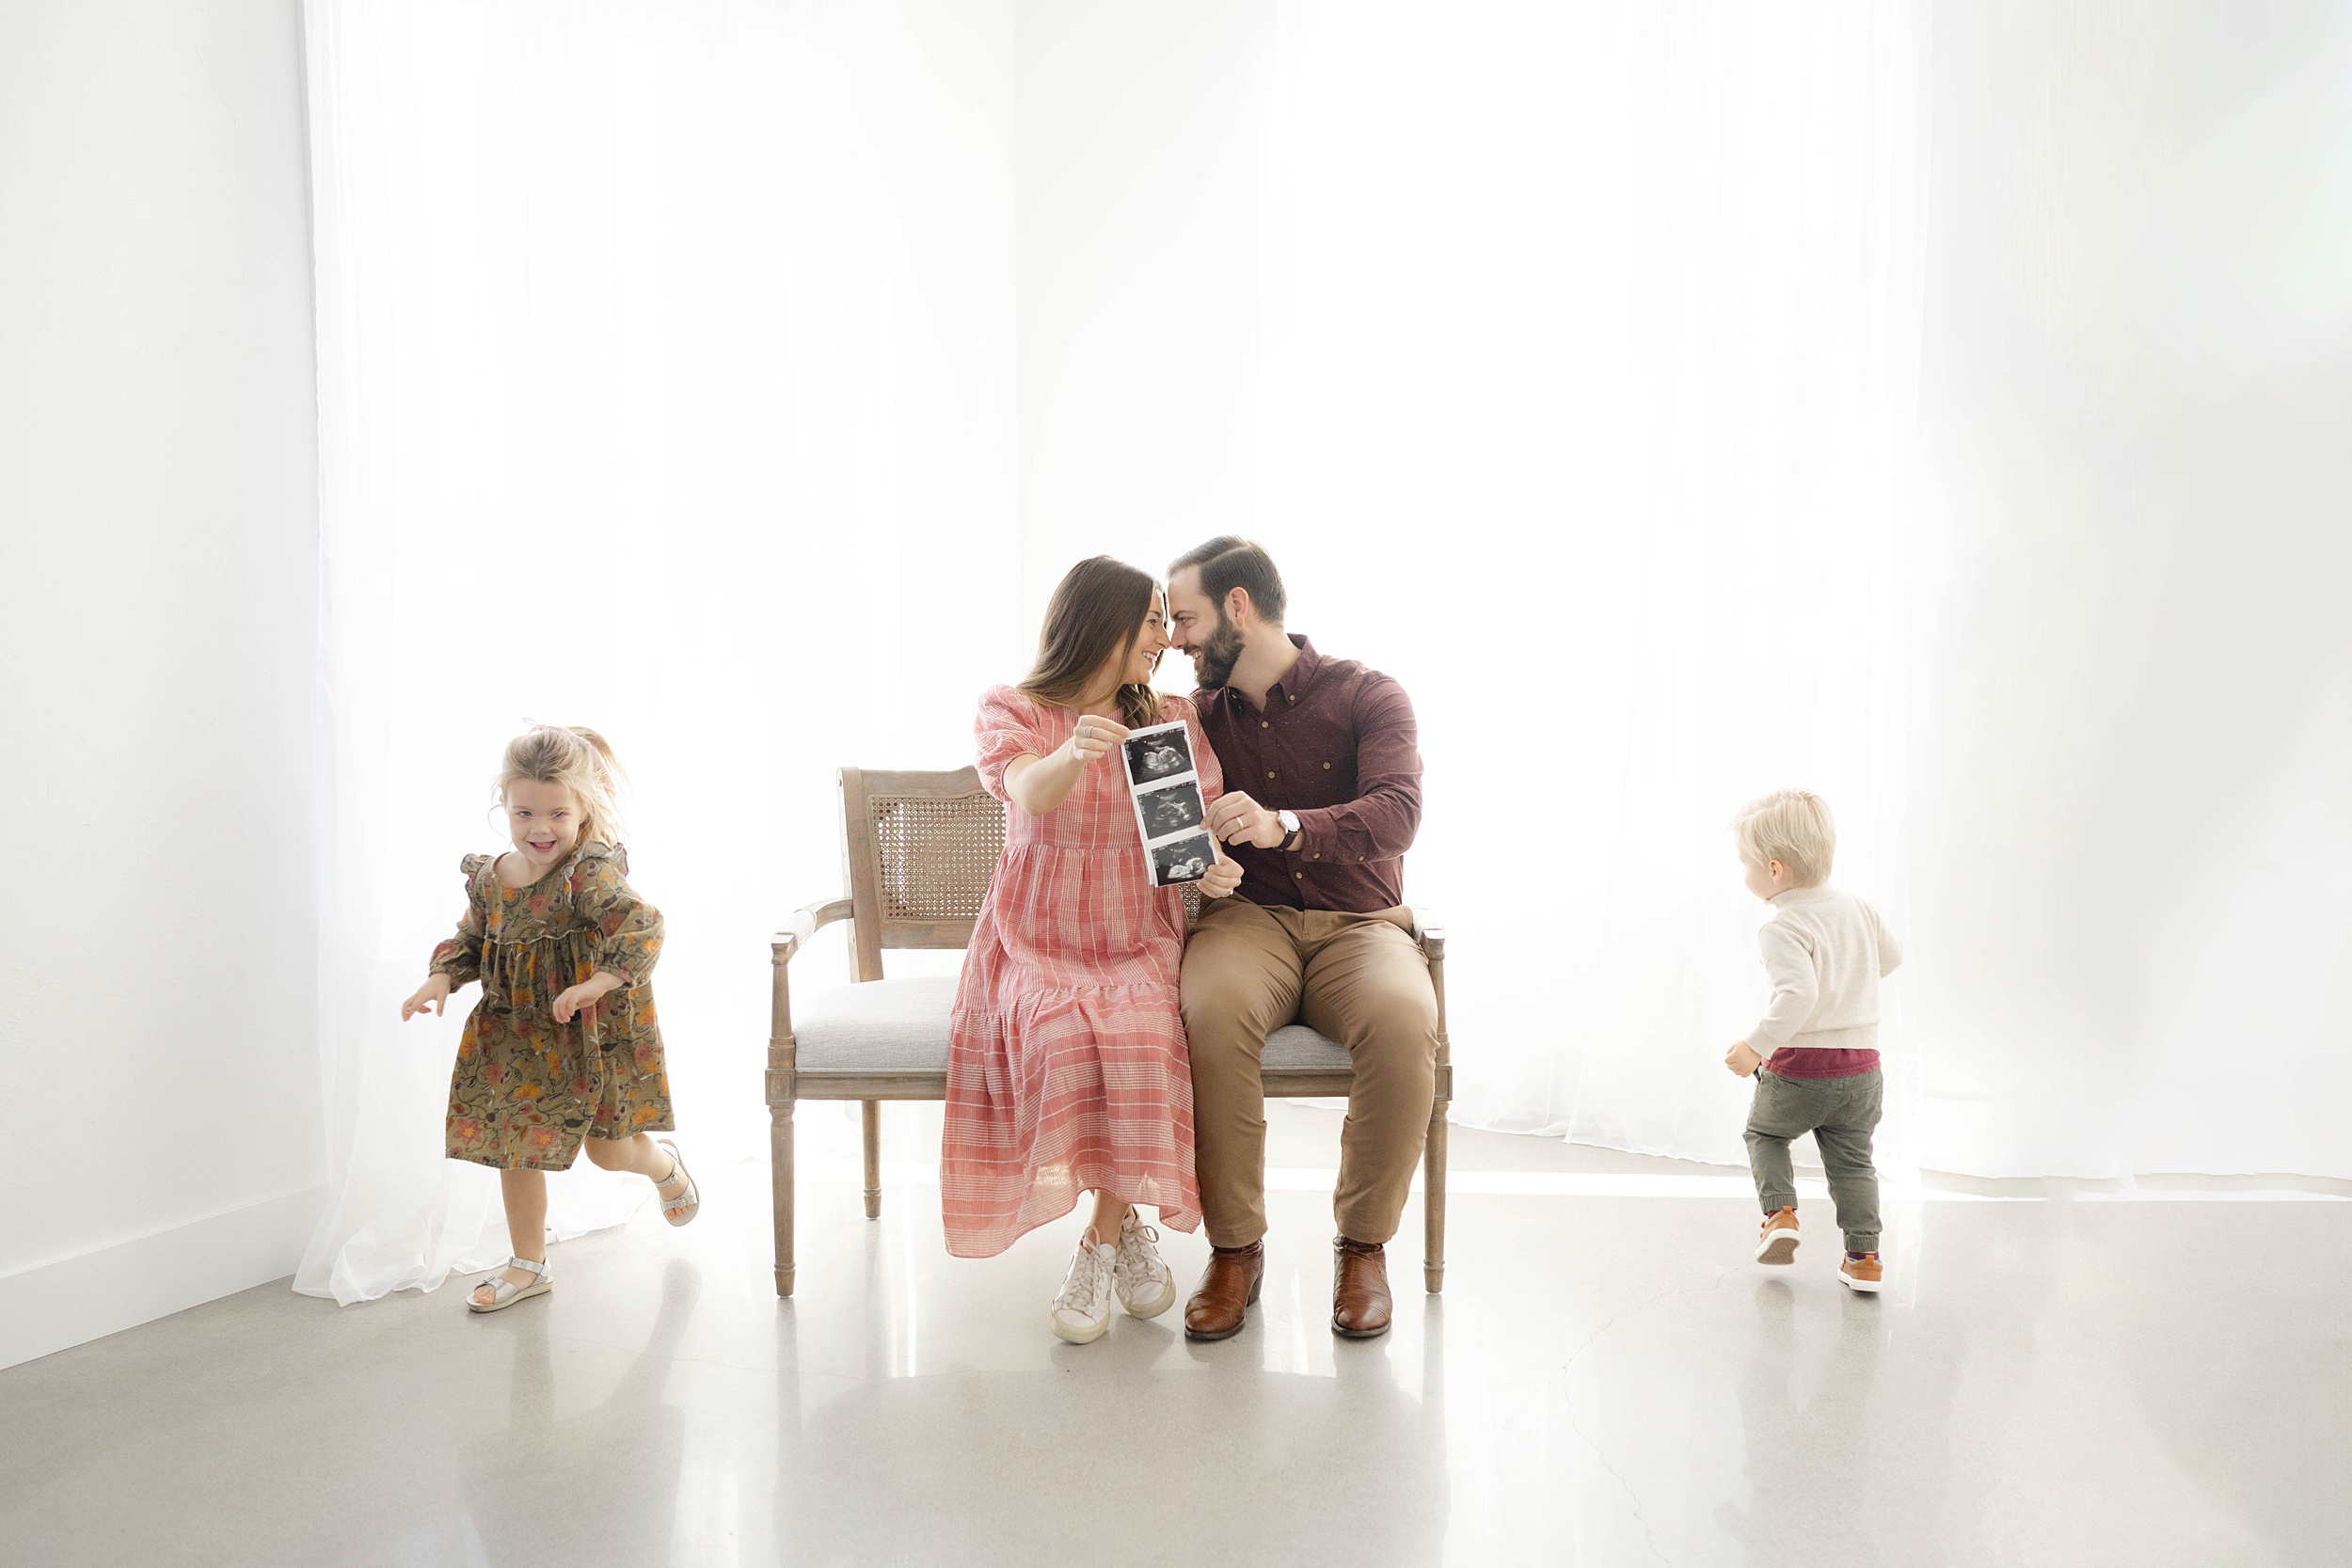 Pregnant parents sit on a bench holding their sonogram while their toddler son and daughter run circles around them in a studio